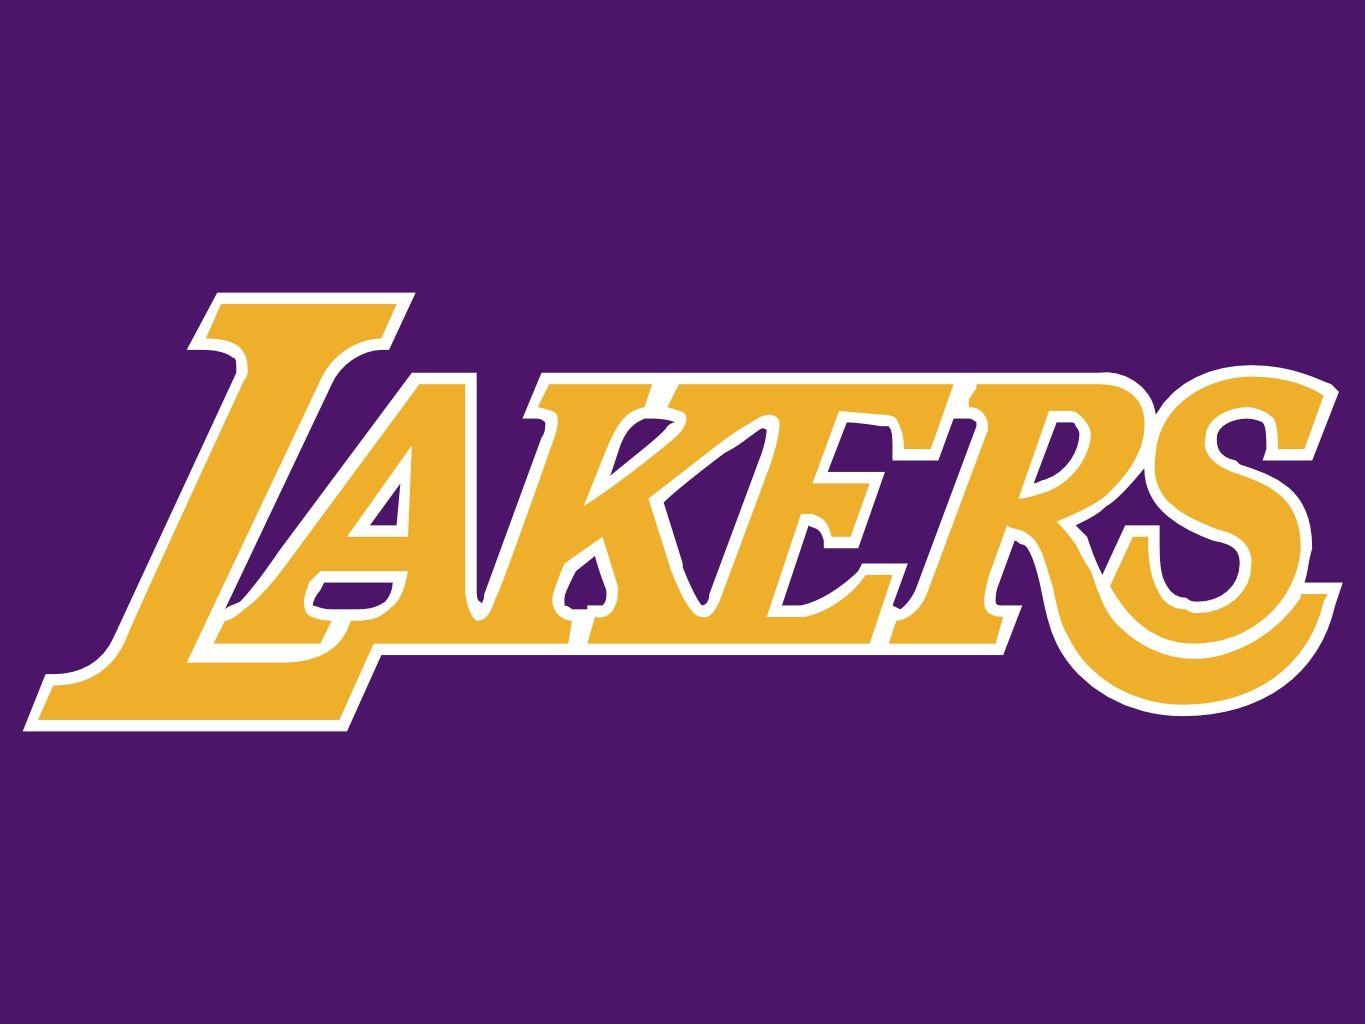 Purple and Yellow Logo - The Lakers logo is an excellent example of using purple and yellow ...